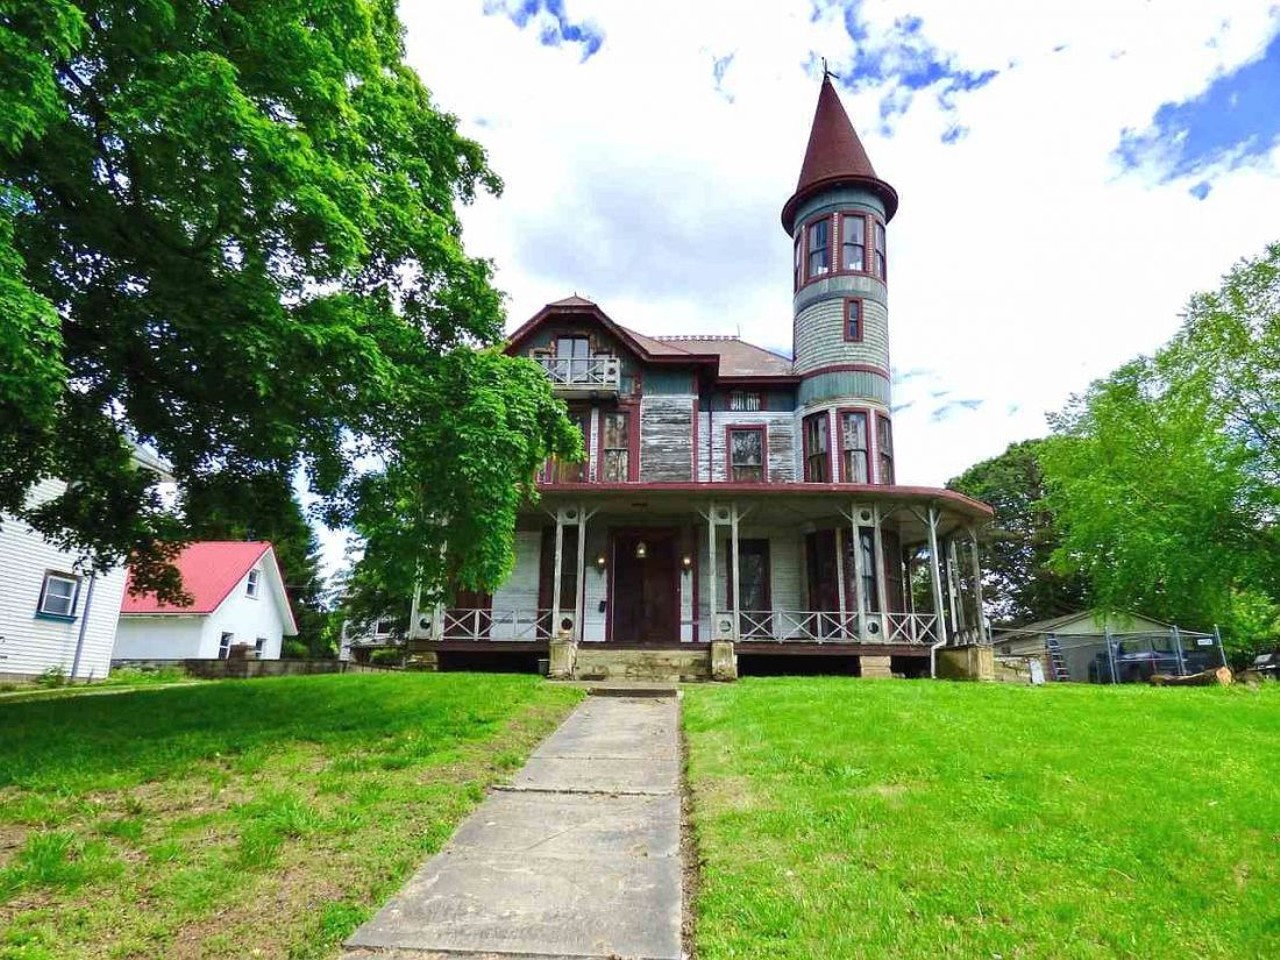 For Old, Cheap Houses With Potential, It's Hard to Beat This Ohio Gem